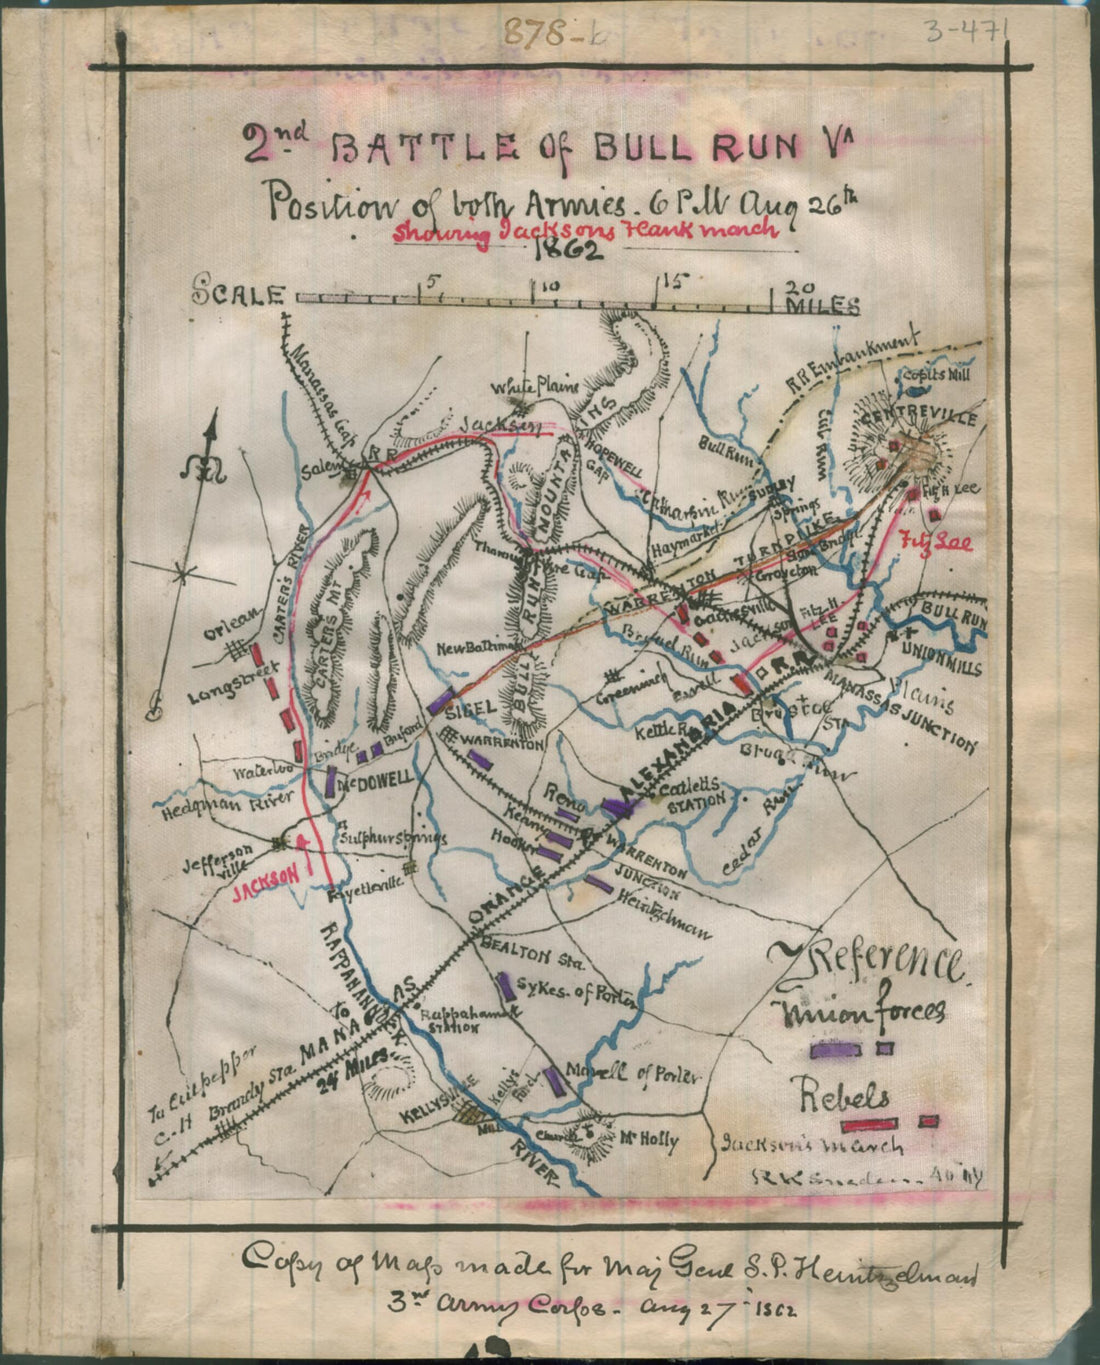 This old map of 2nd Battle of Bull Run, Va. Position of Both Armies, 6 P.m. Aug. 26th 1862, Showing Jackson&